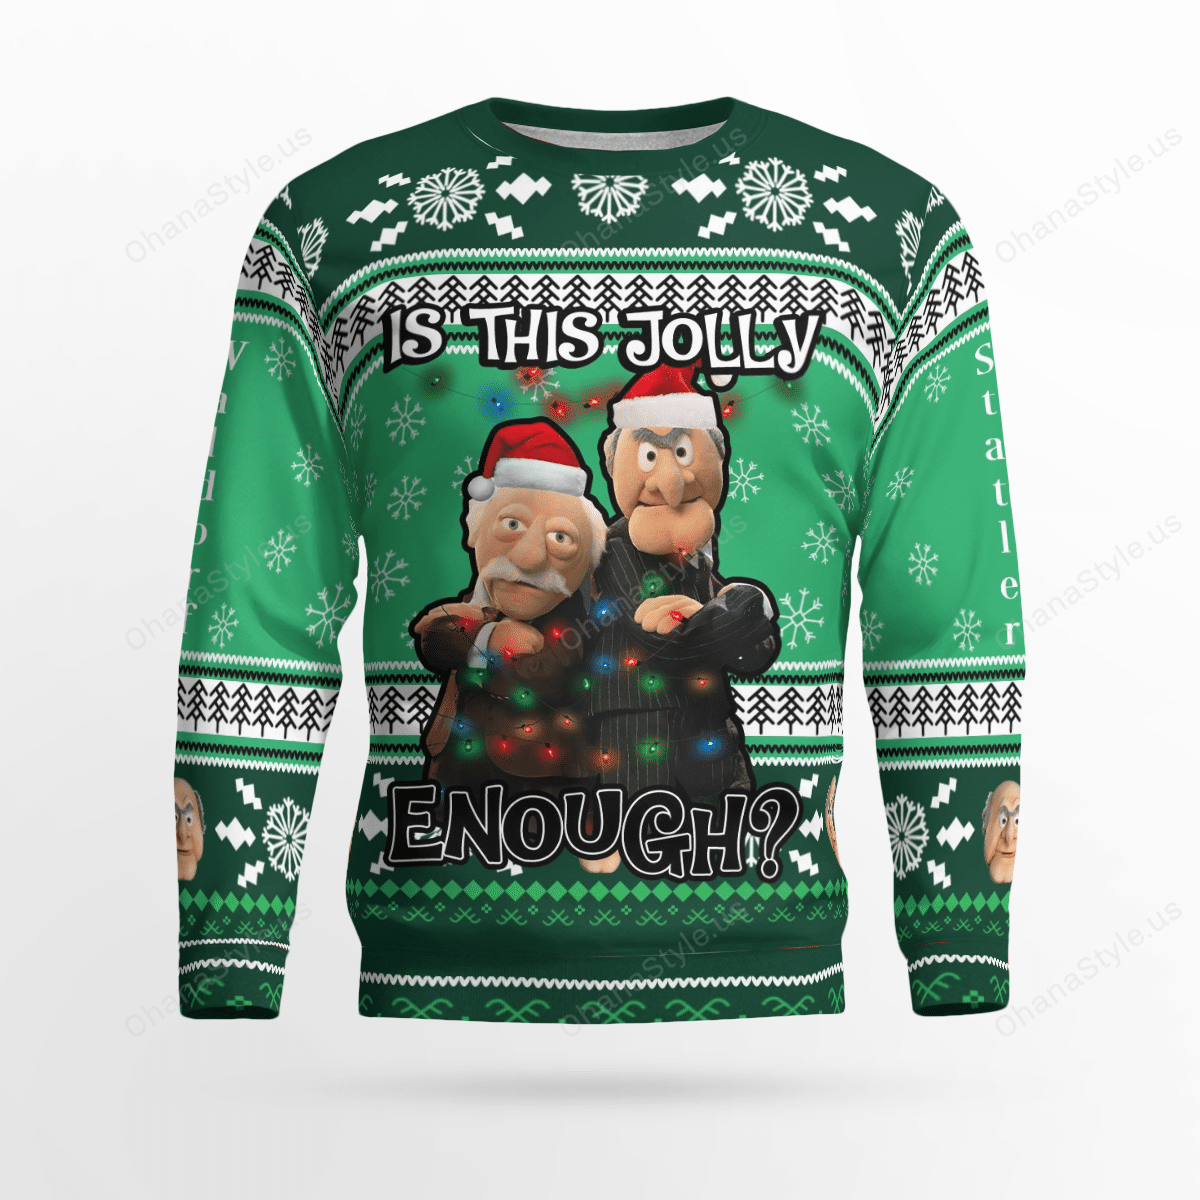 Statler and Waldorf Is this jolly enough Christmas Sweater 1 2 3 4